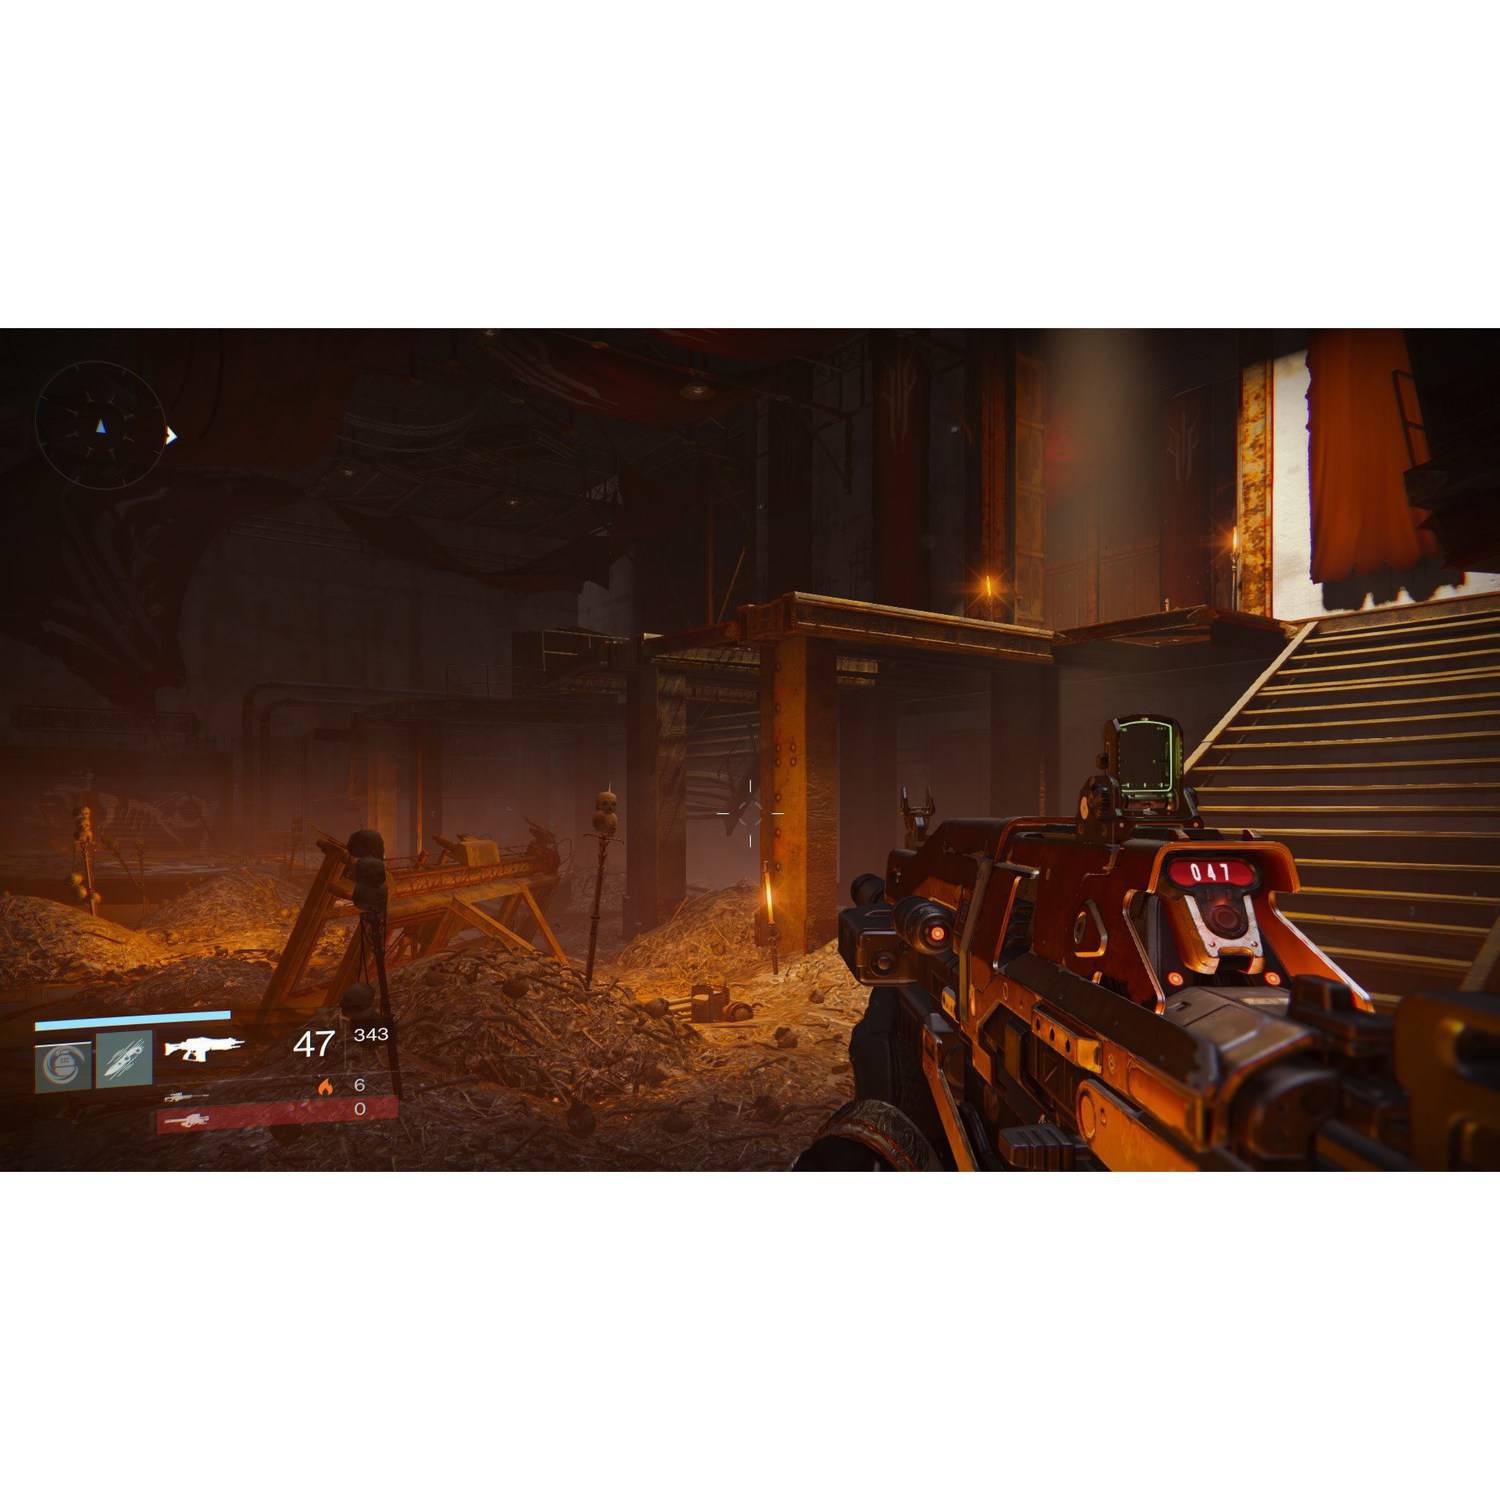 Destiny: The Taken King Legendary Edition, Activision, PlayStation 4, 047875874428 - image 18 of 31